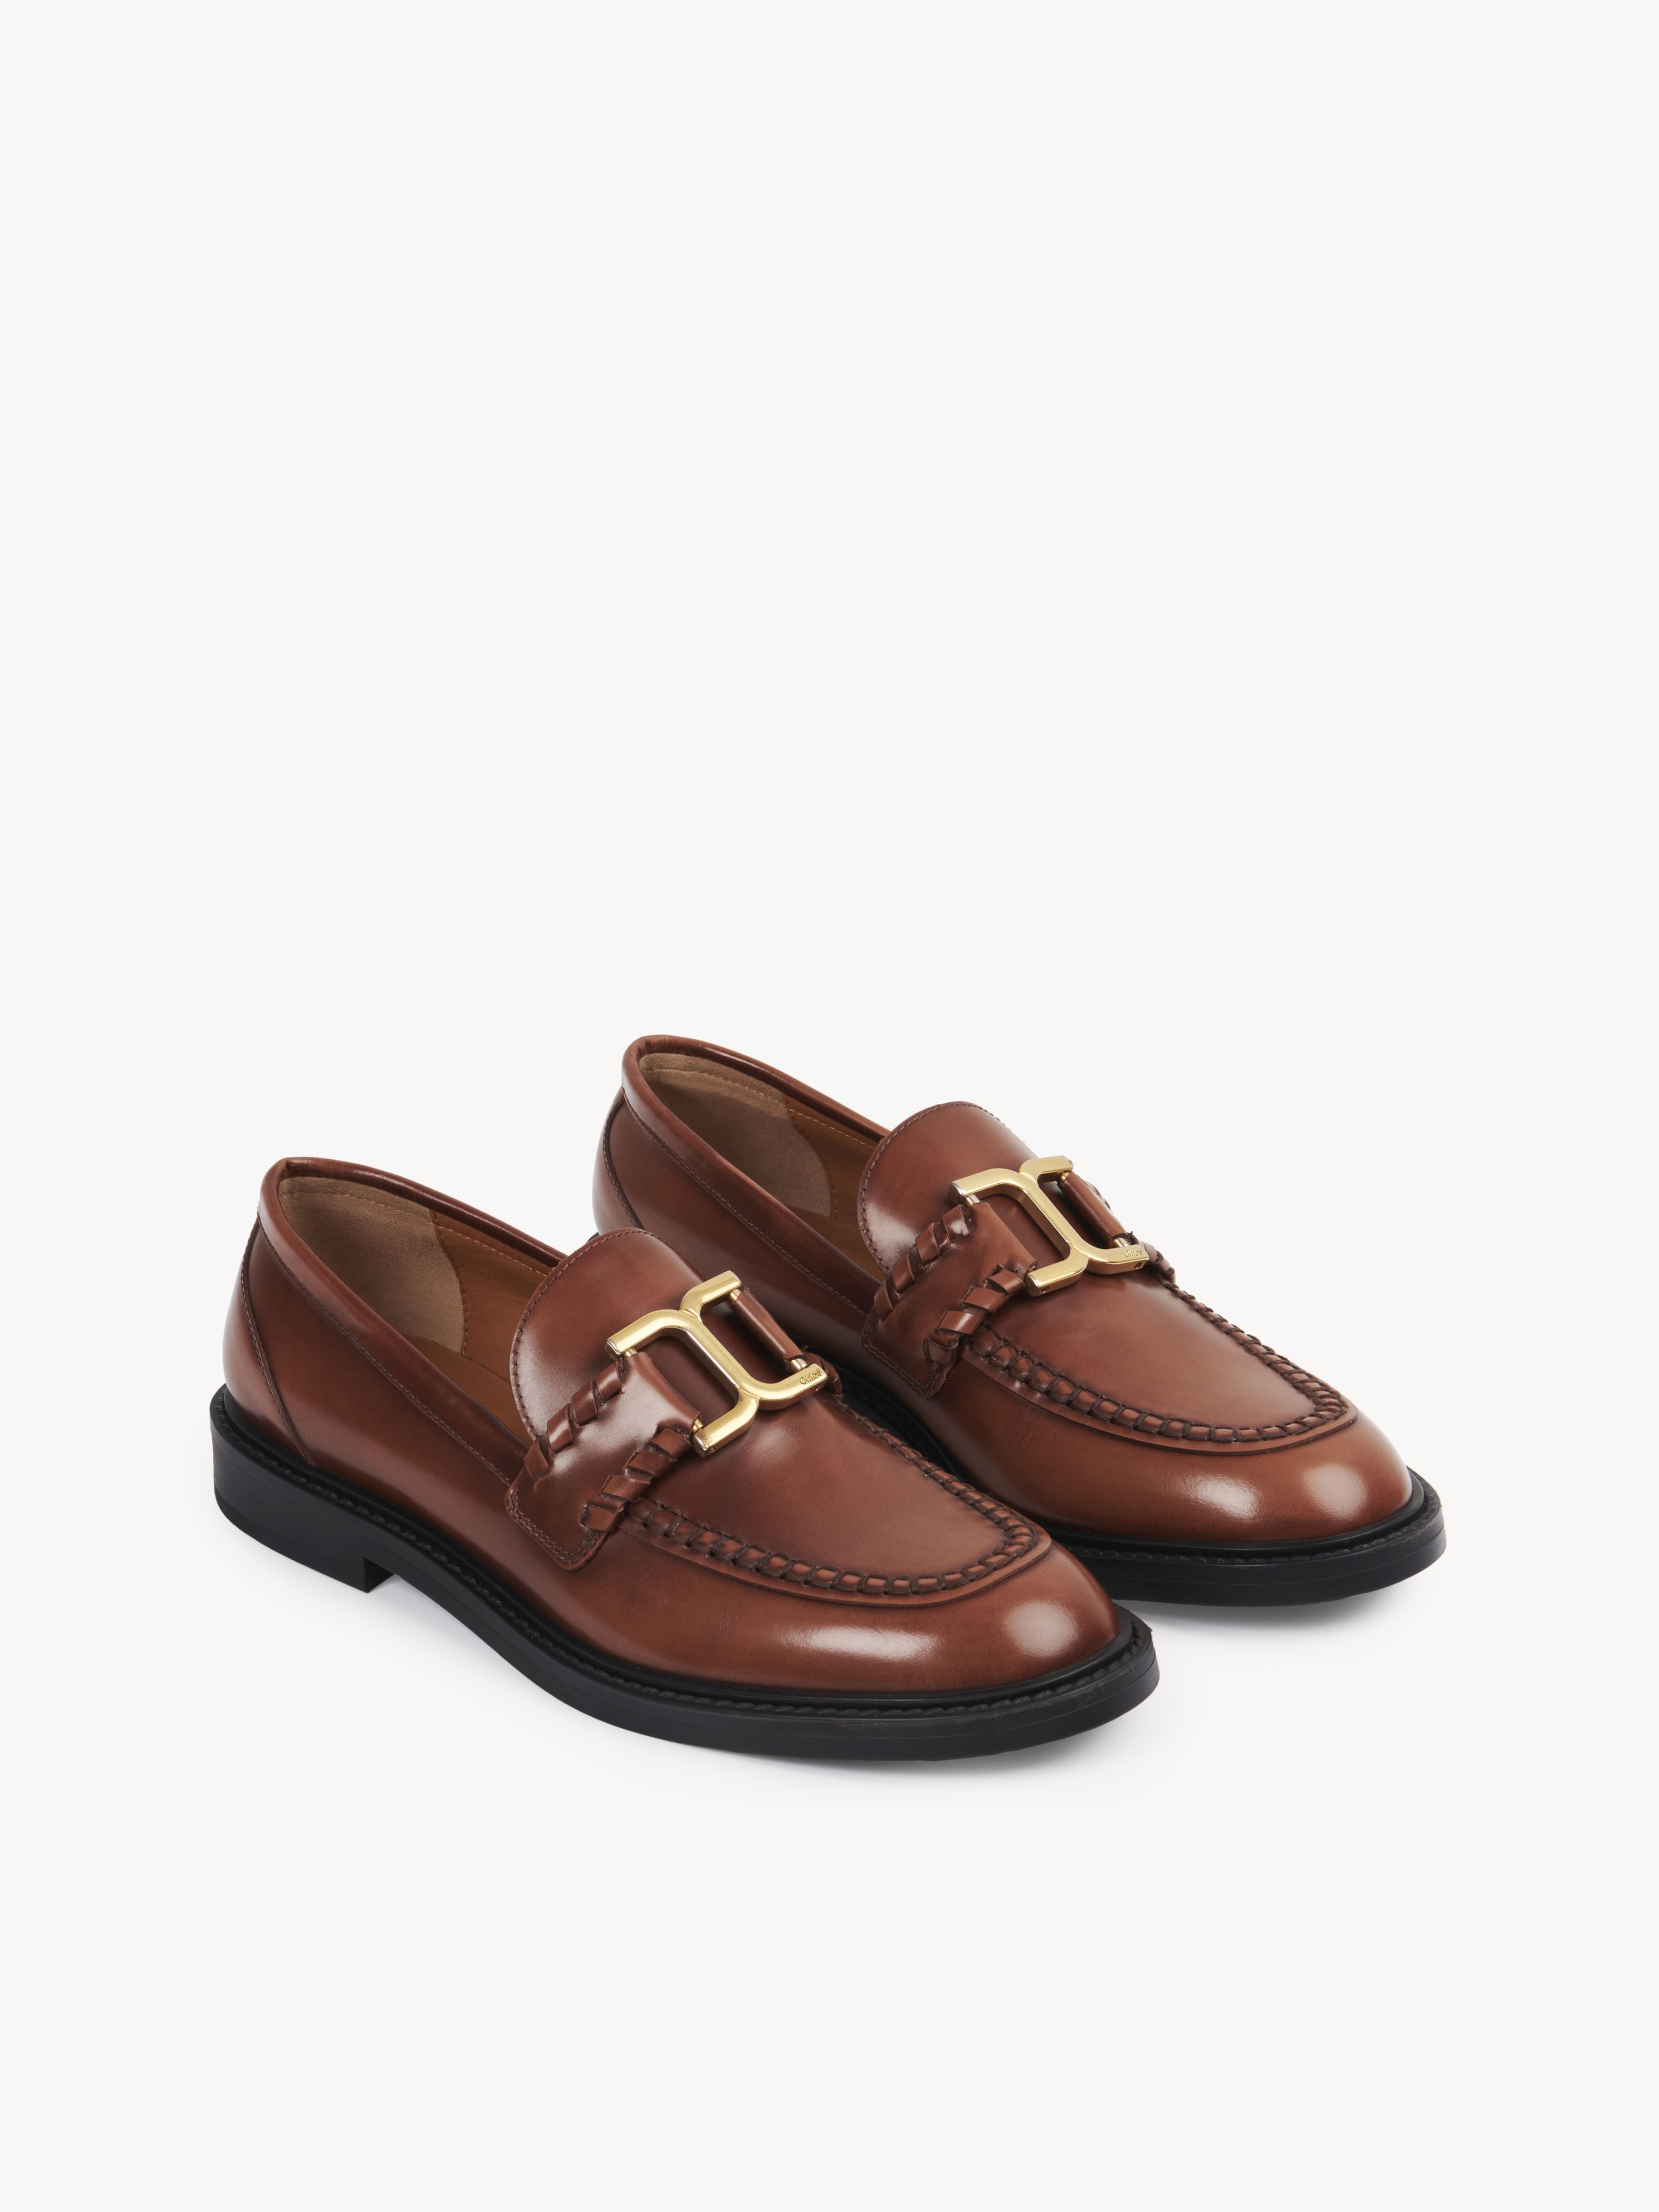 Chloé Marcie Leather Chain Loafers In Brown